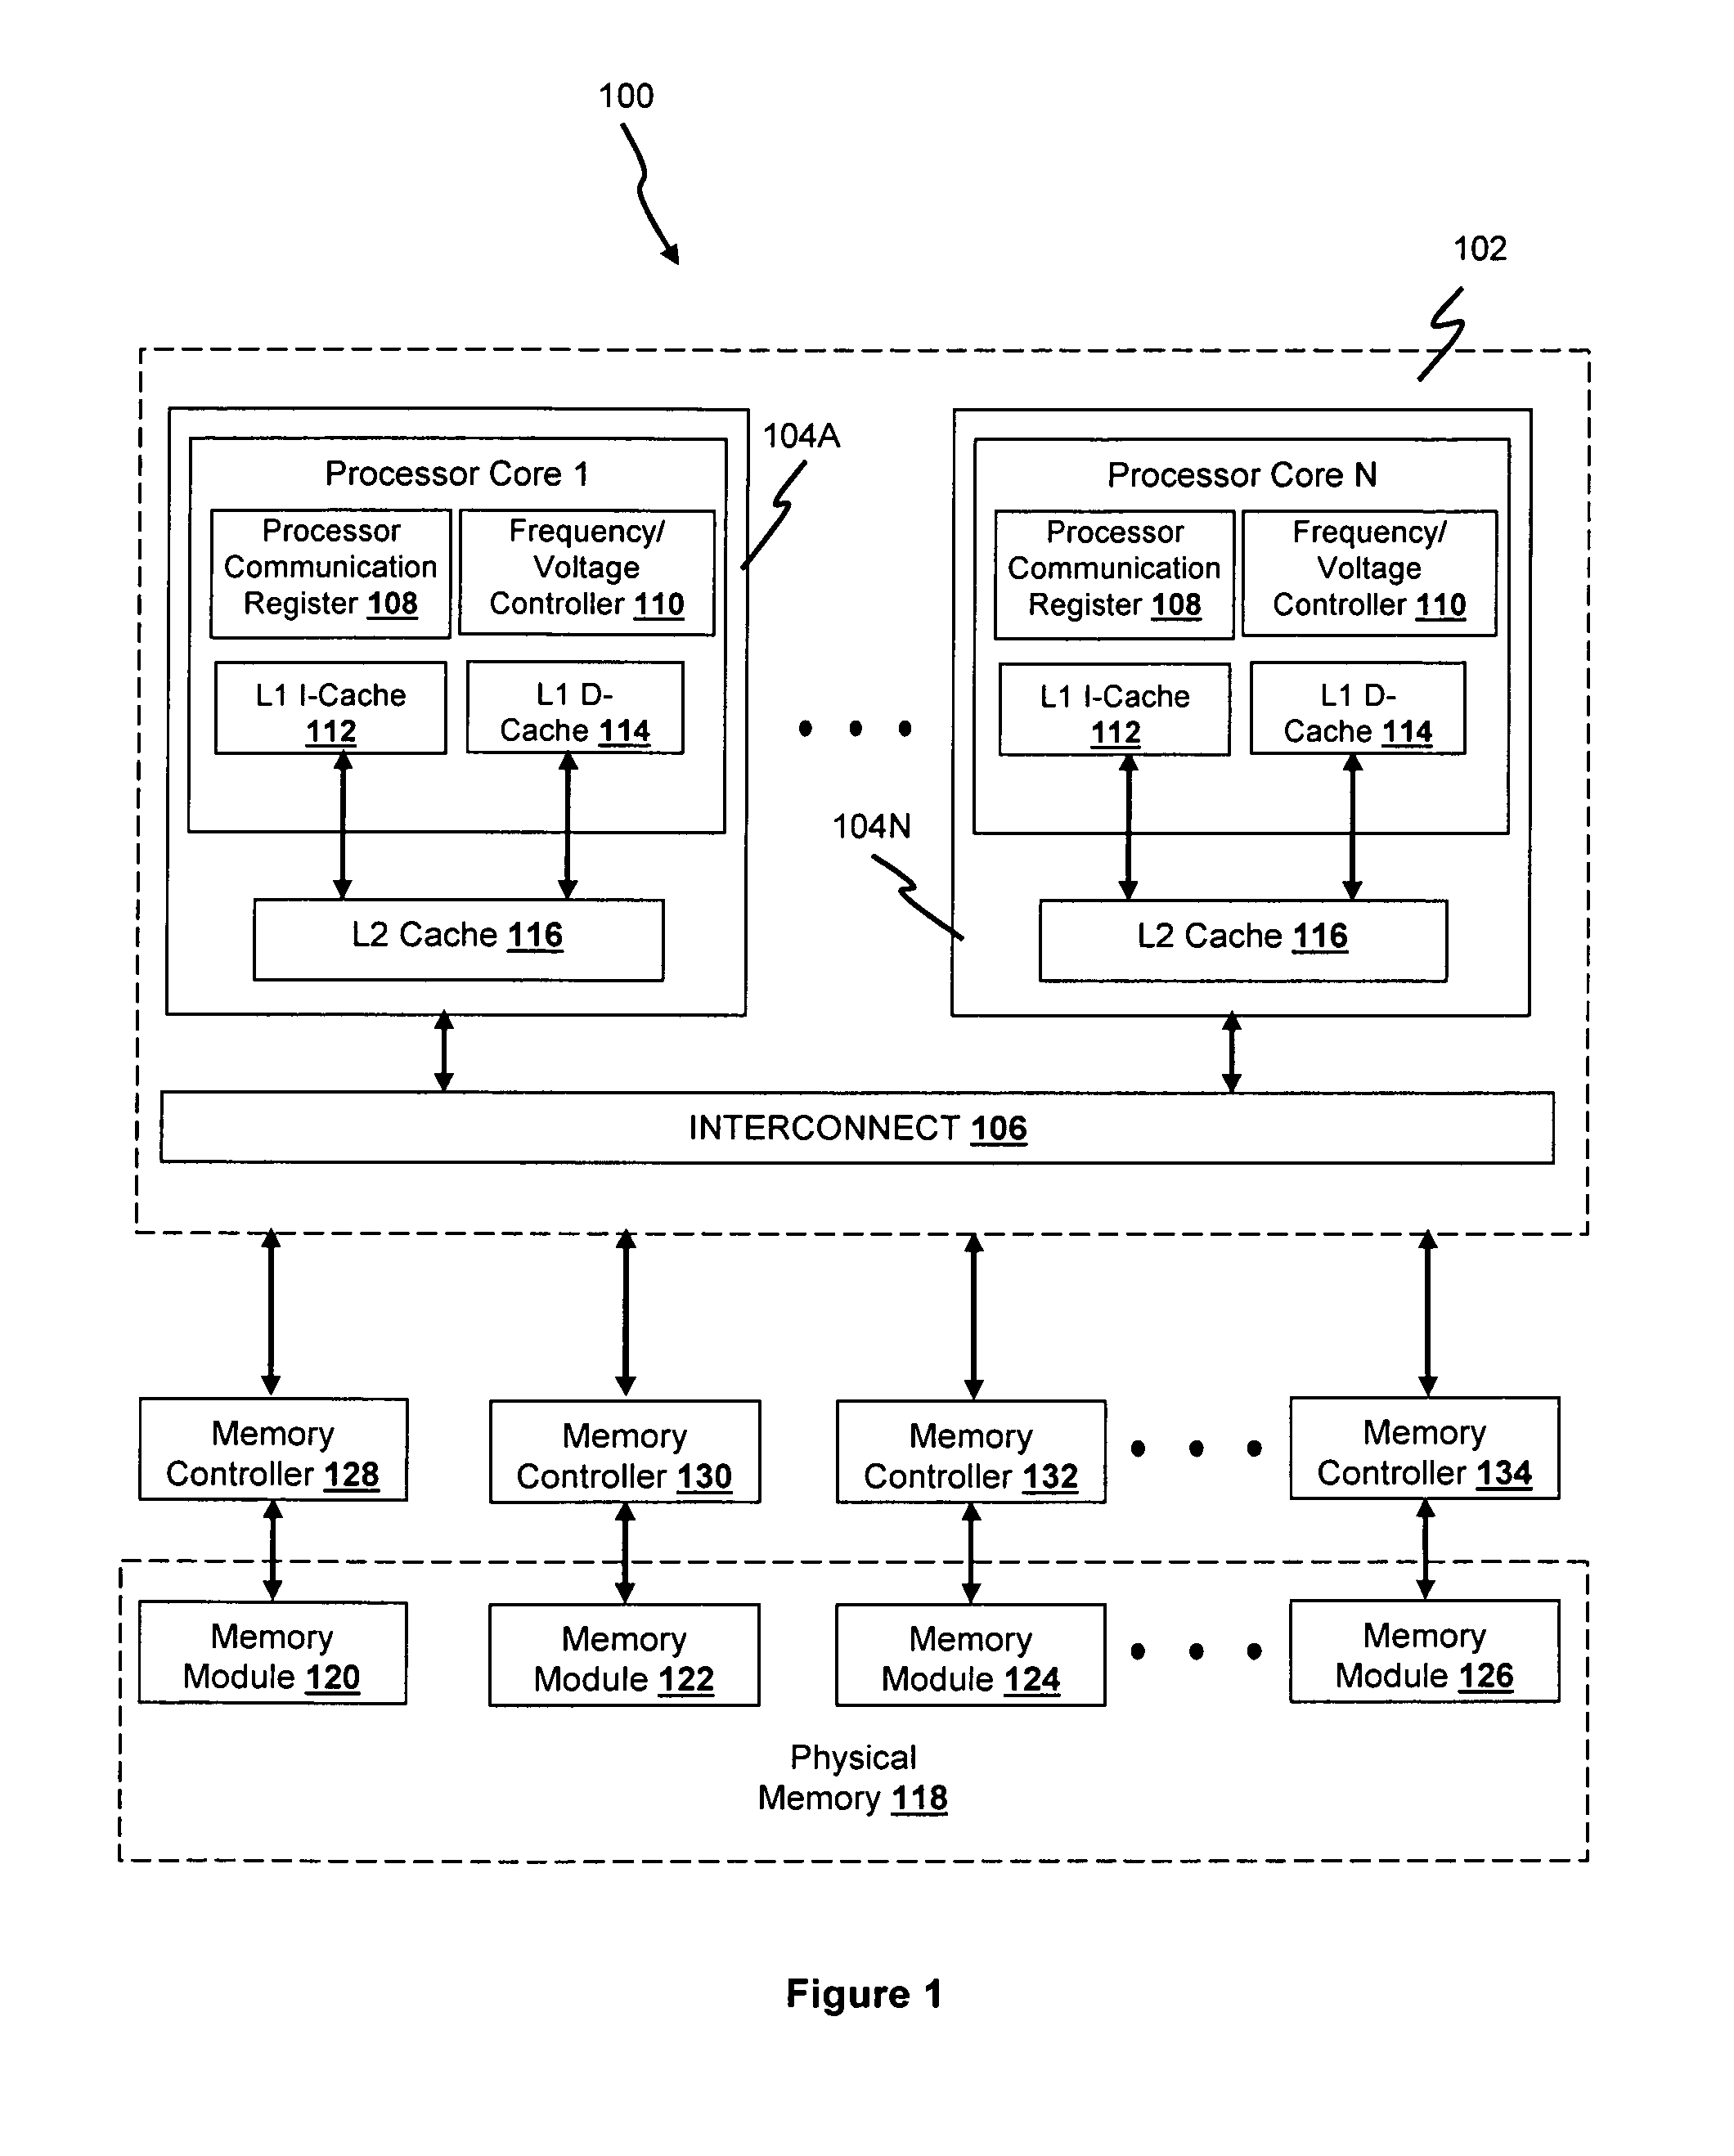 Method for optimizing voltage-frequency setup in multi-core processor systems